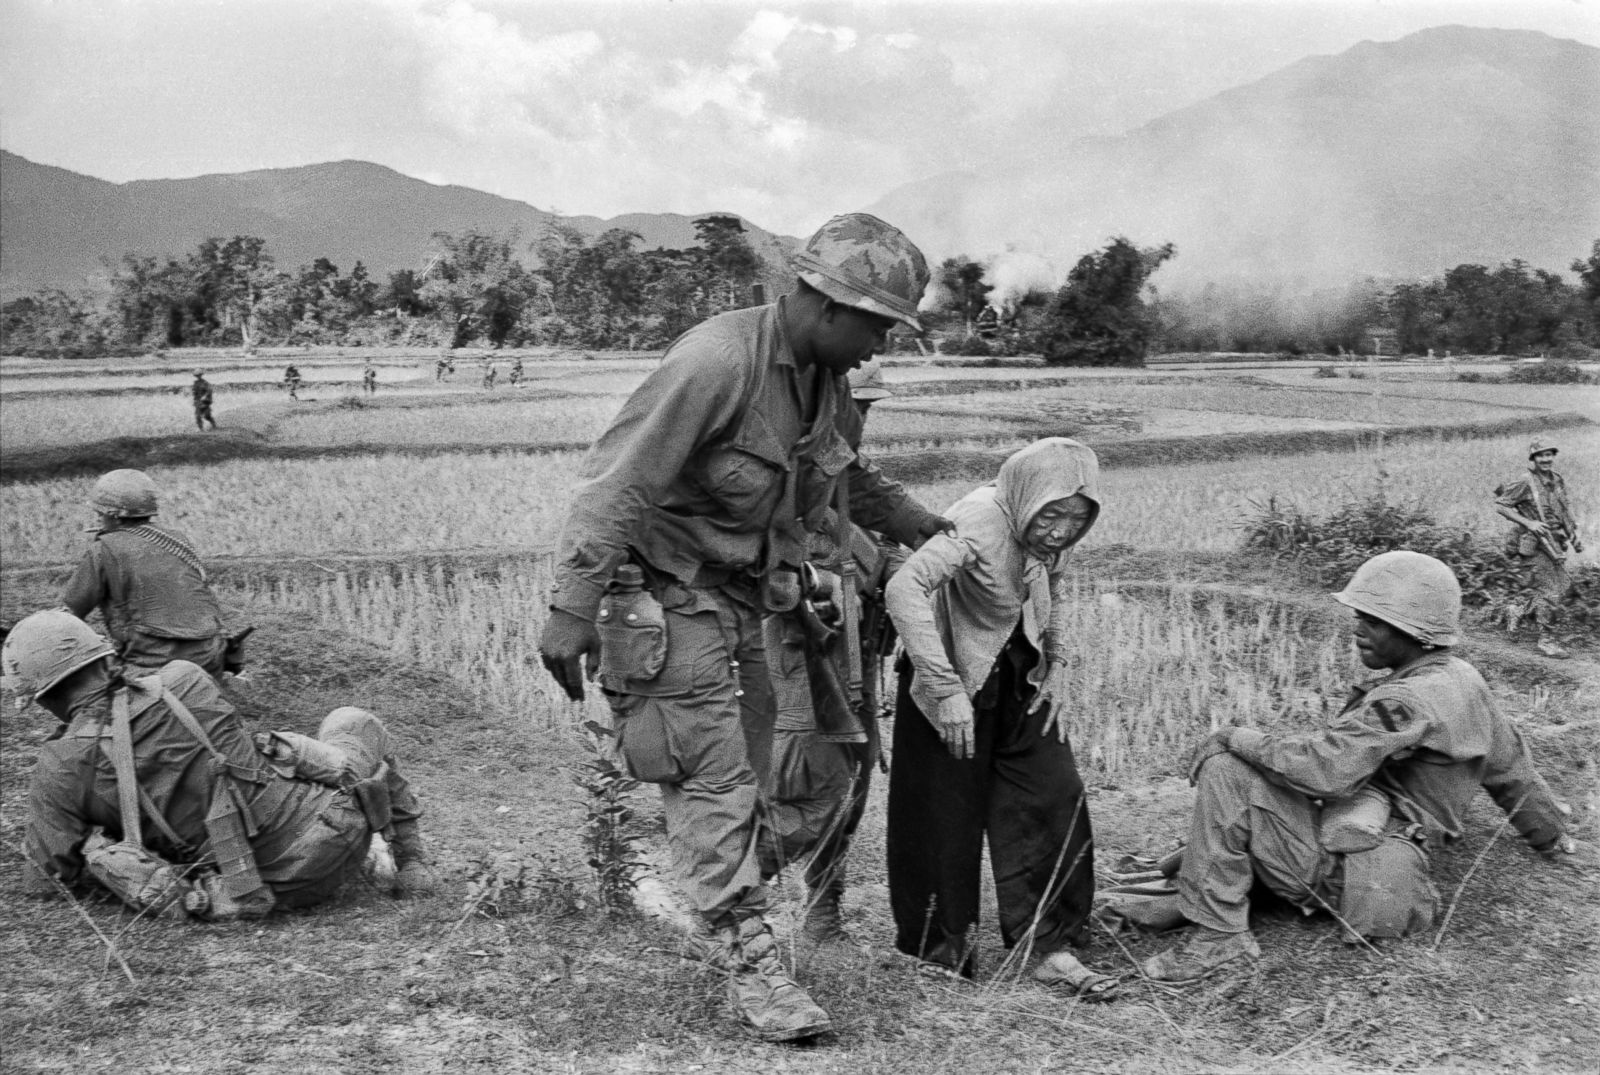 THE TRUE CONDUCT OF US TROOPS IN VIETNAM